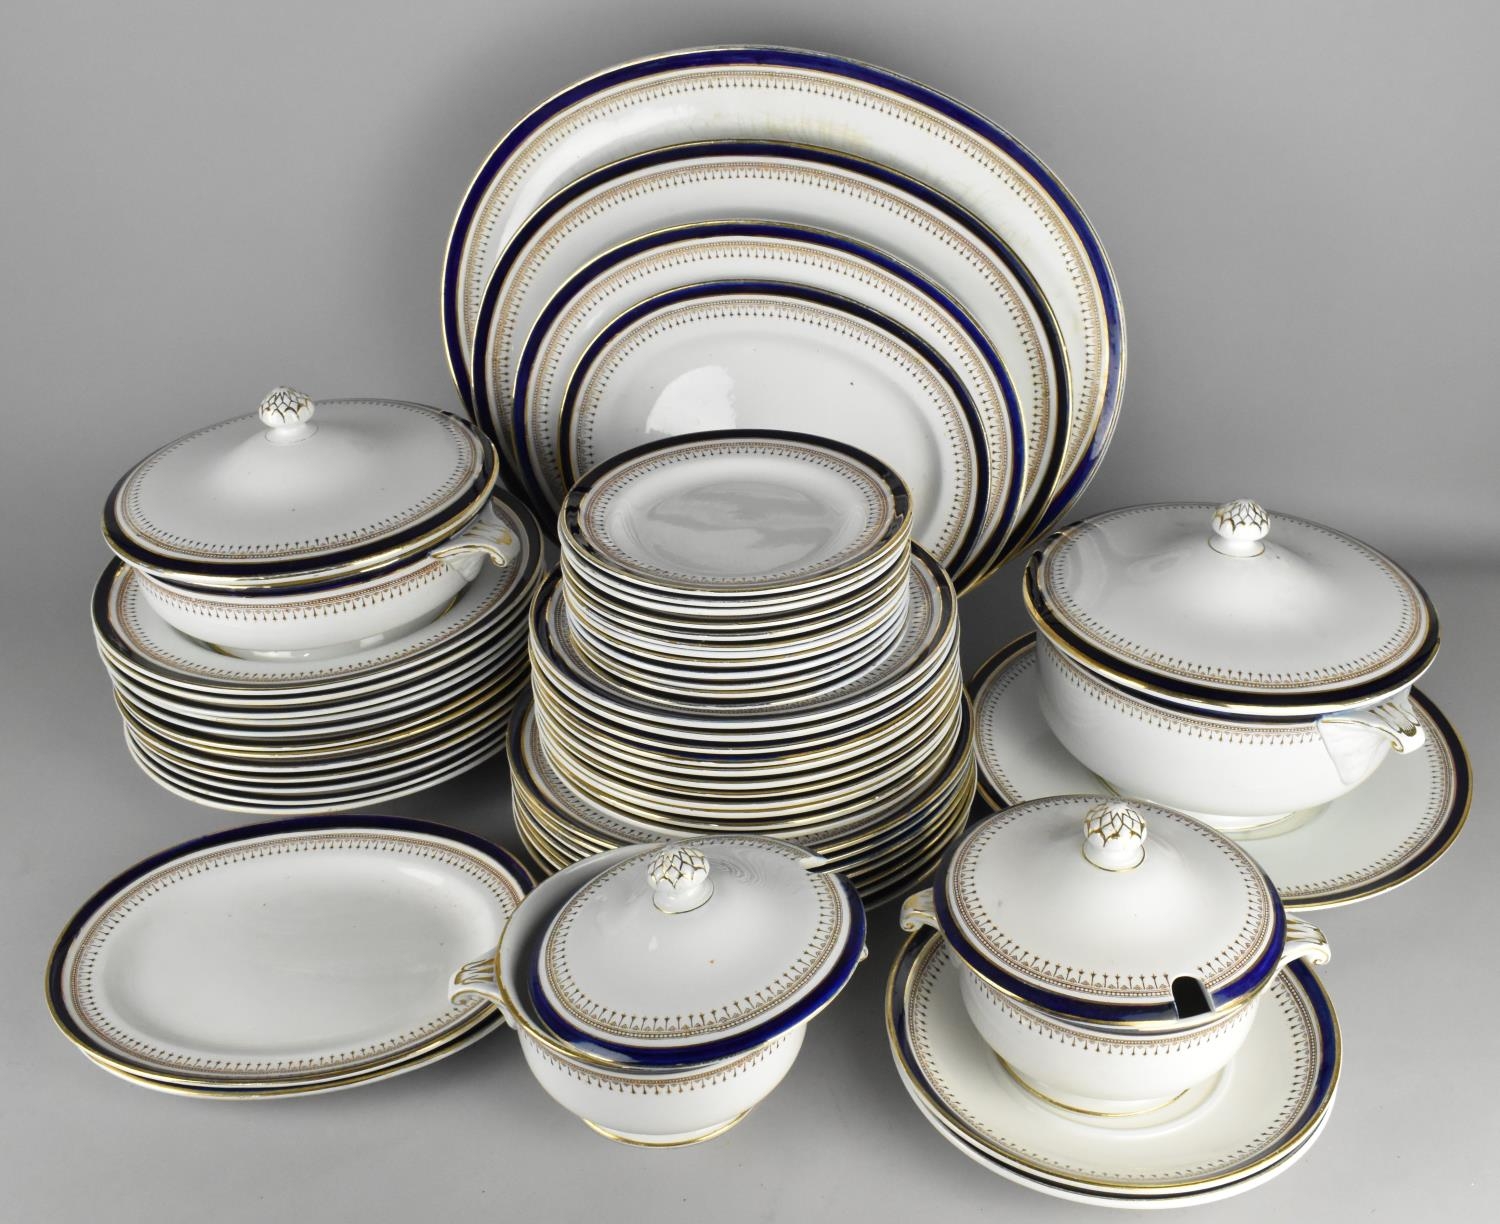 A Large Minton's Gilt and Blue Trim Dinner Service to Comprise Graduated Meat Plates, Plates,